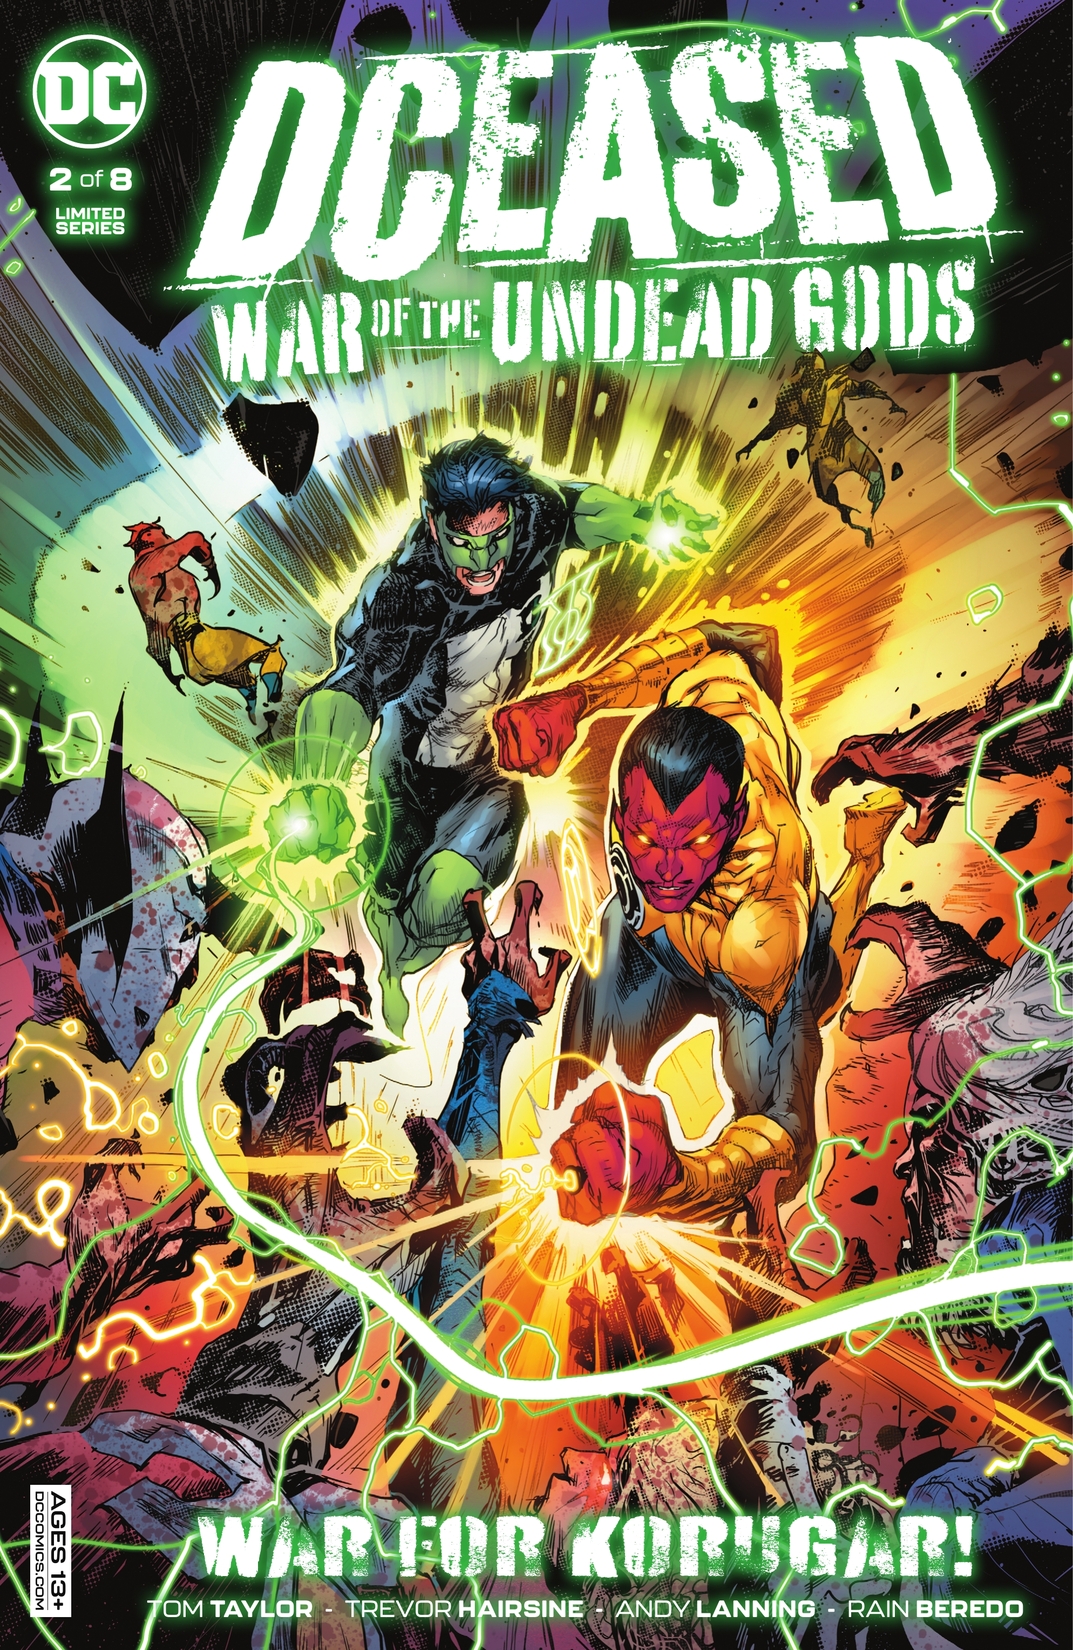 DCeased: War of the Undead Gods #2 preview images